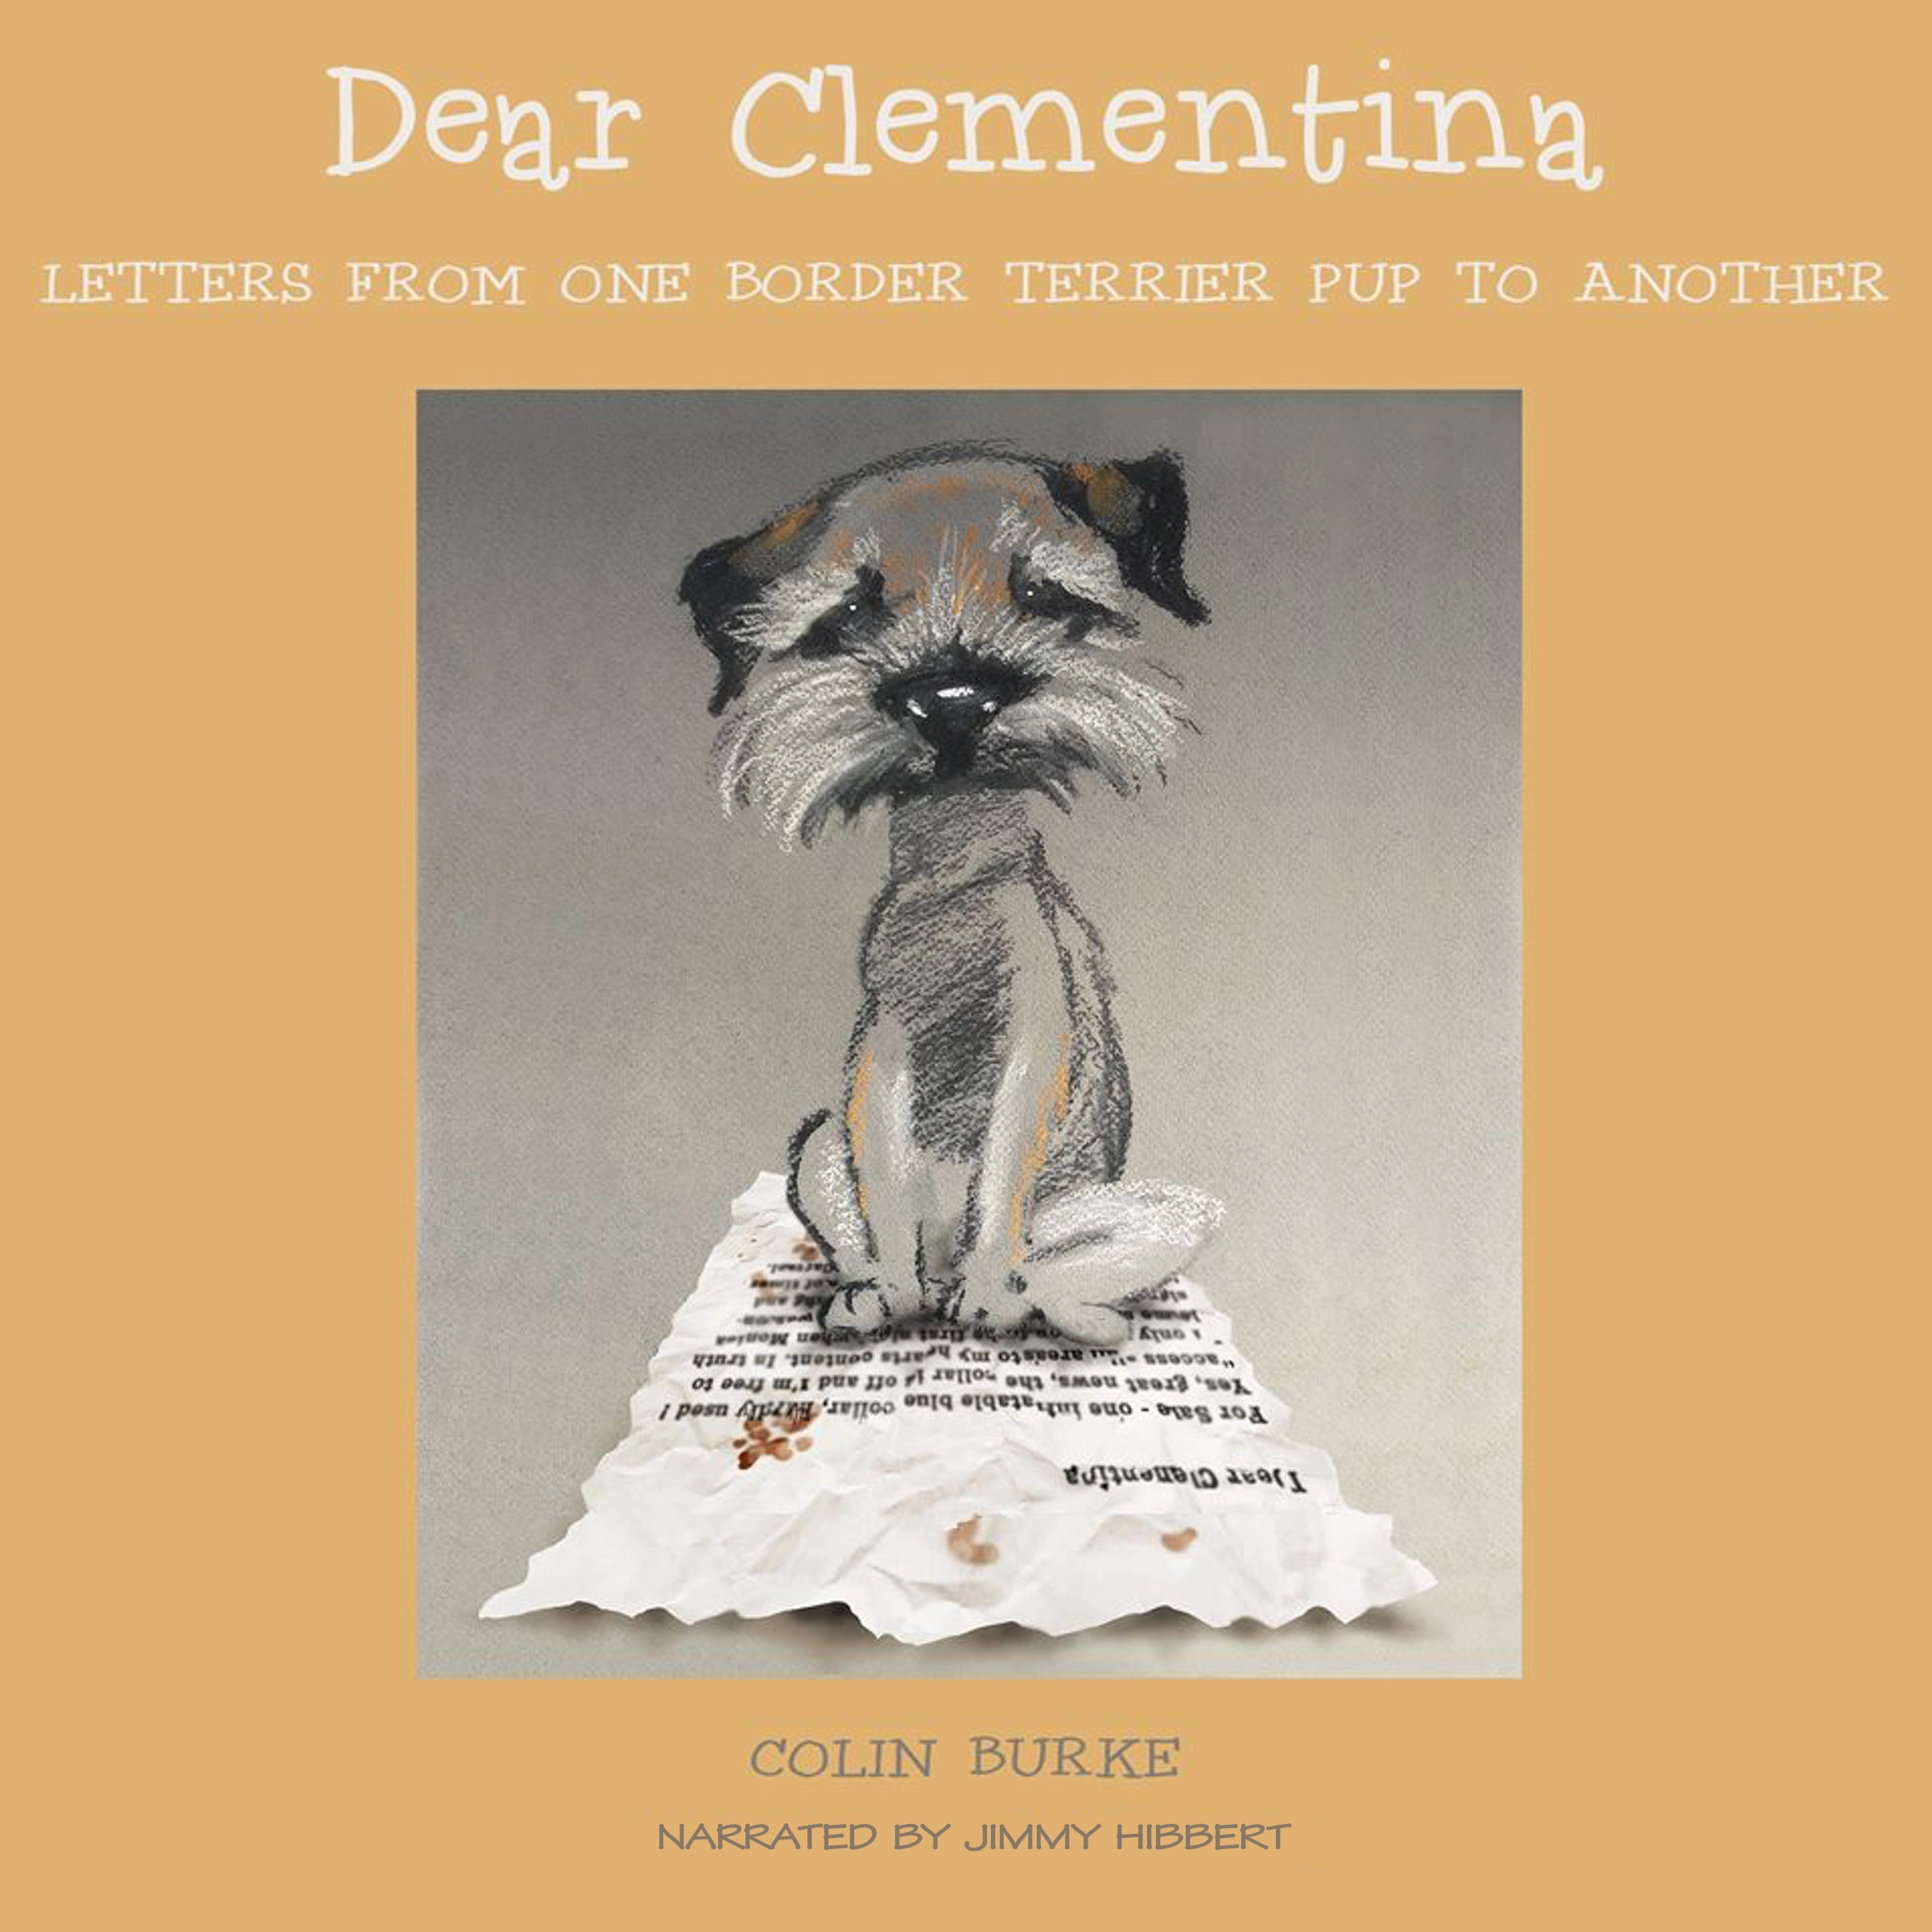 Dear Clementina Audiobook by Colin Burke